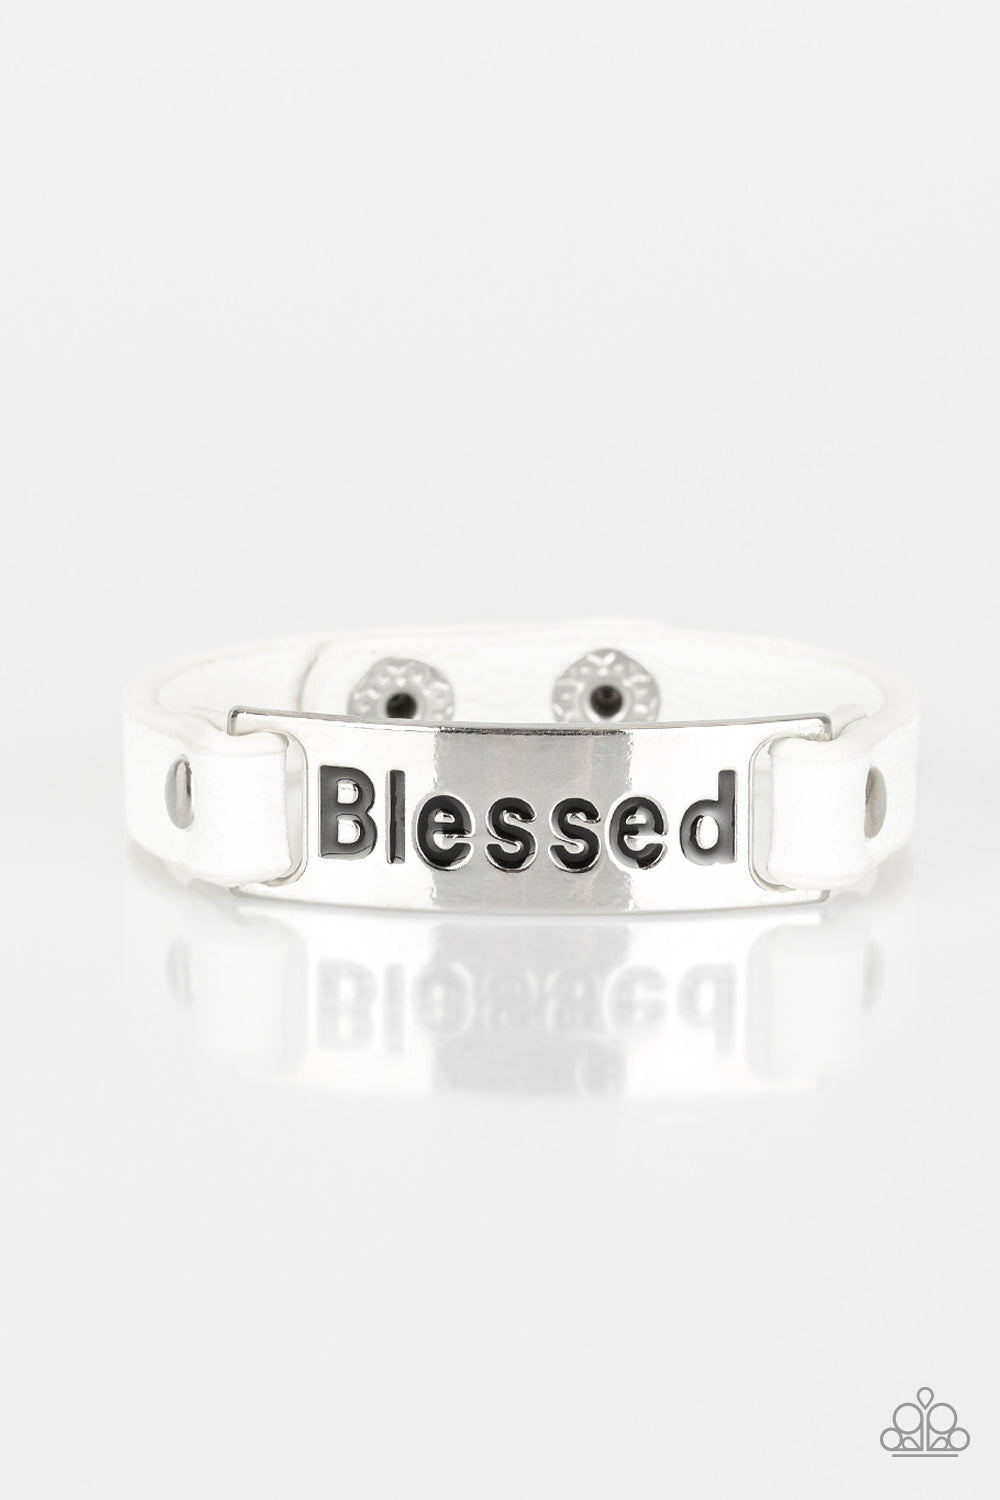 count-your-blessings-white-p9wd-wtxx-091xx